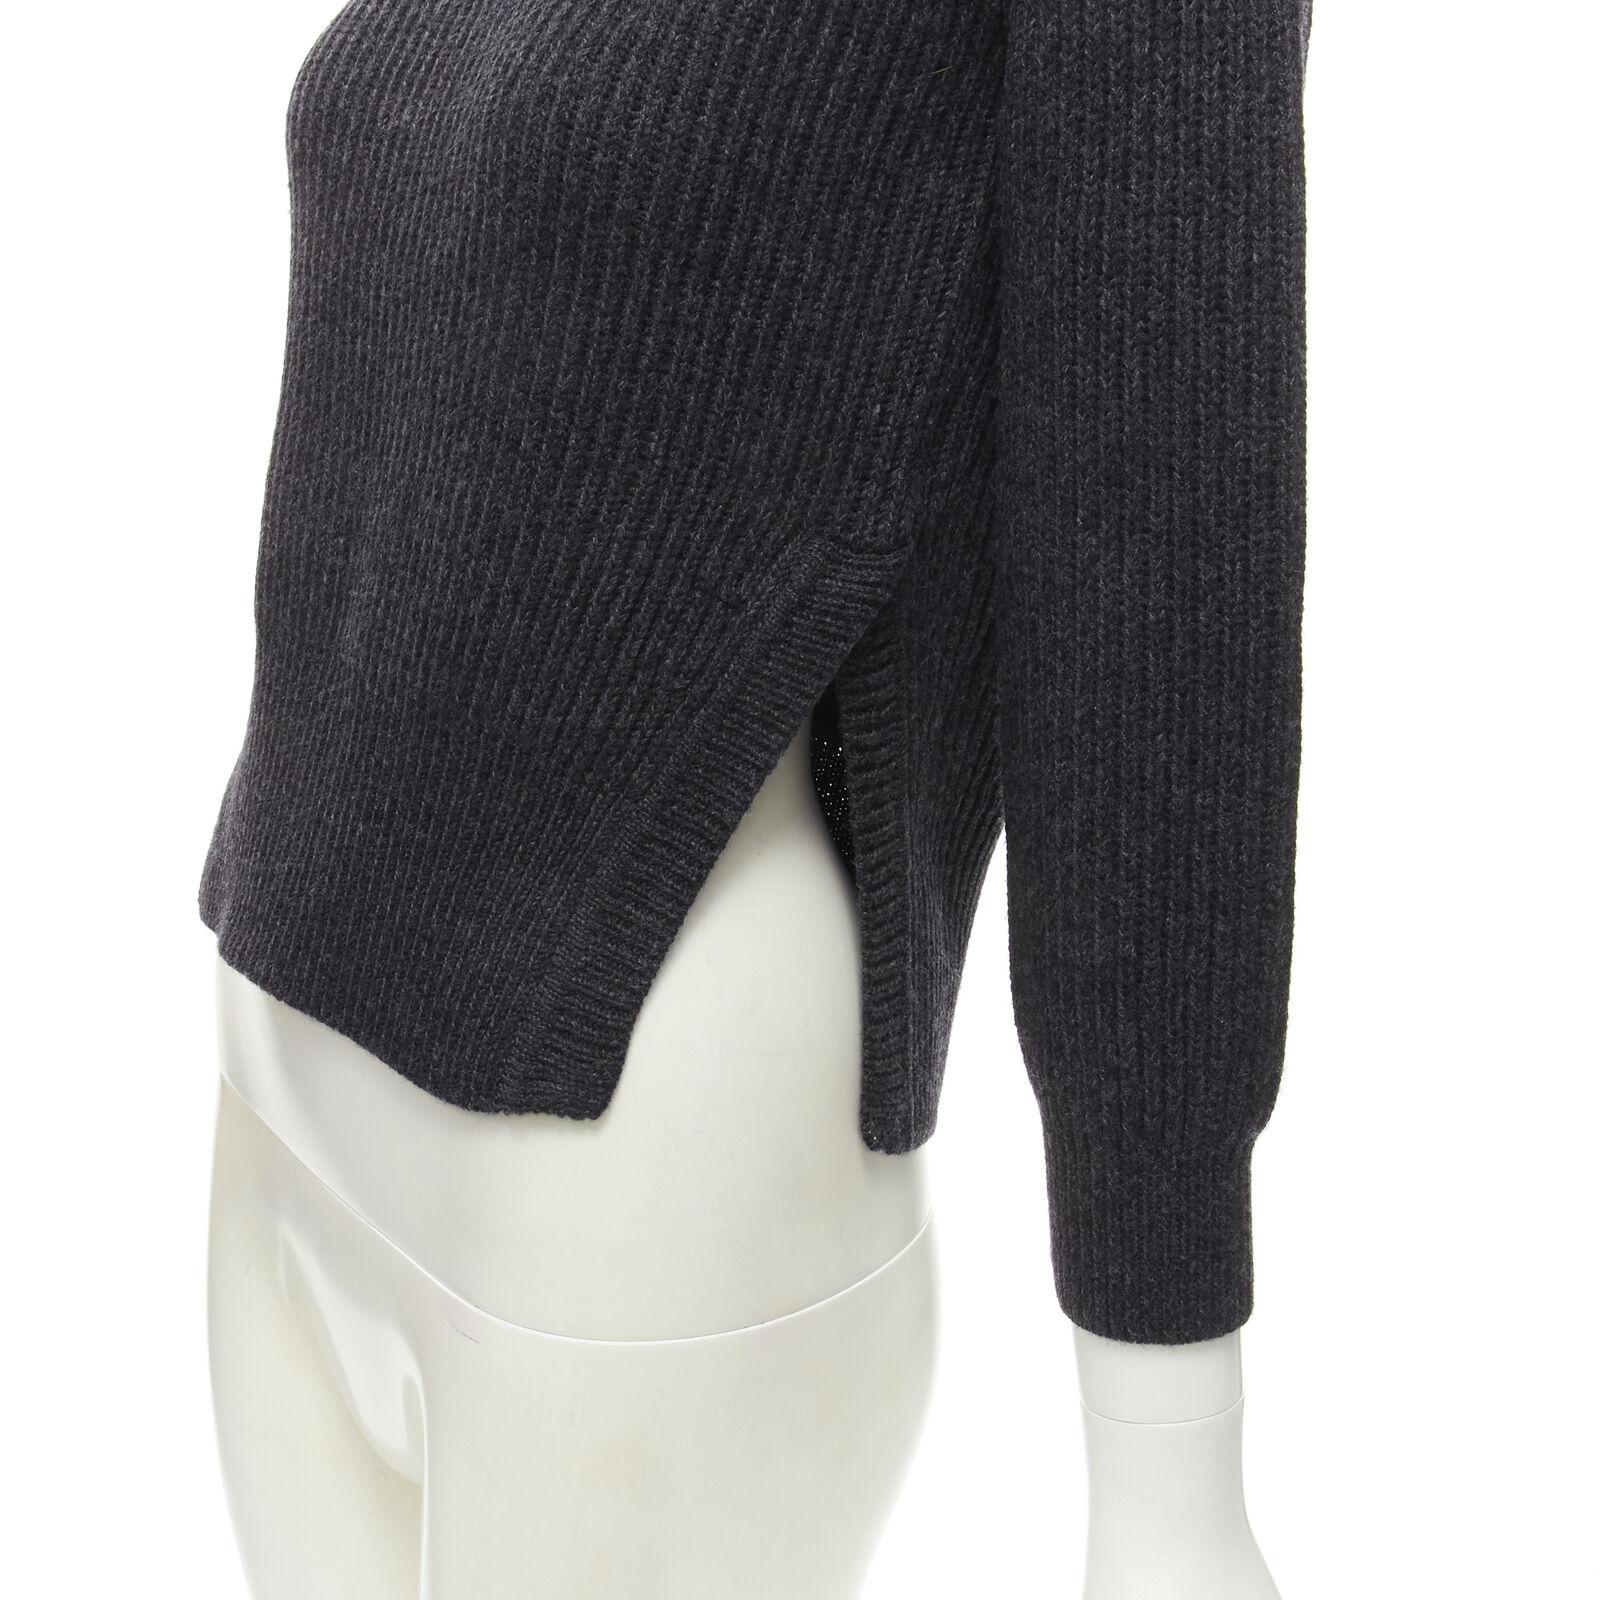 ISABEL MARANT ETOILE 100% wool dark grey side slits ribbed sweater FR36 S
Reference: LNKO/A02037
Brand: Isabel Marant Etoile
Designer: Isabel Marant
Material: 100% Wool
Color: Grey
Pattern: Solid
Closure: Pullover
Made in: